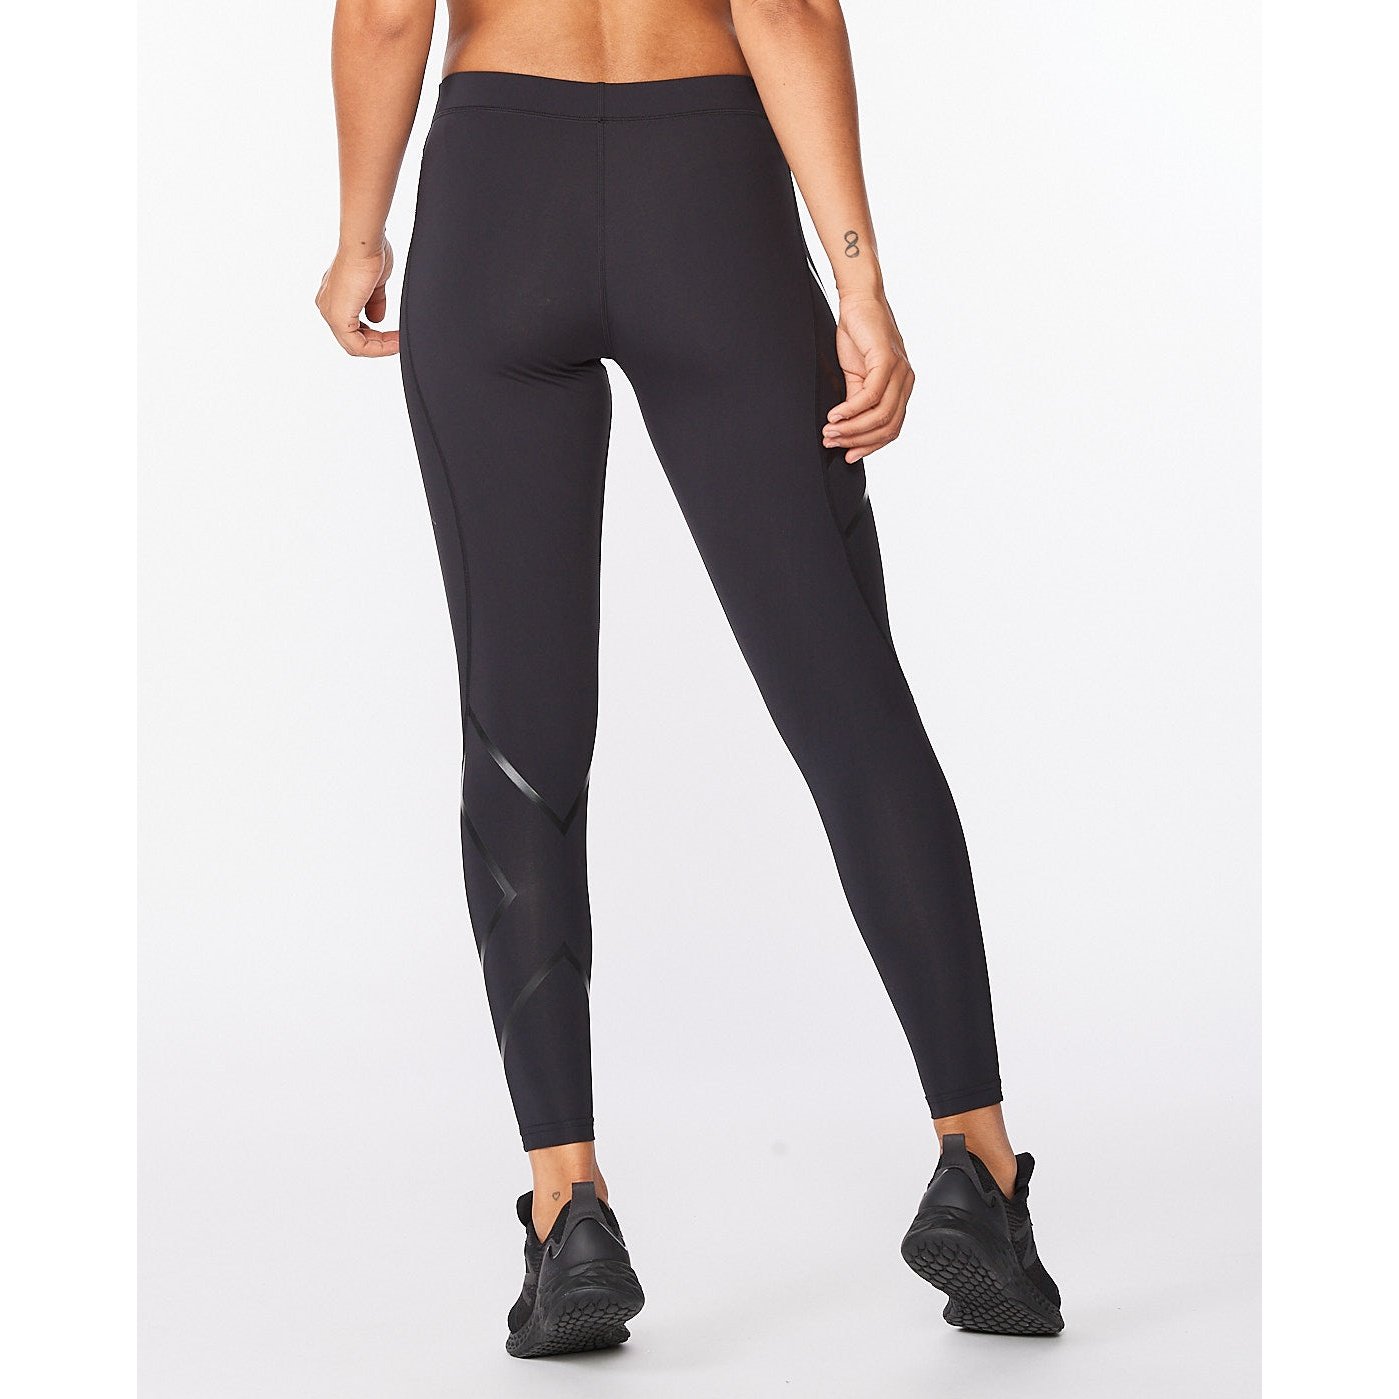 Breathable & Anti-fungal 2xu Compression Tights for All 